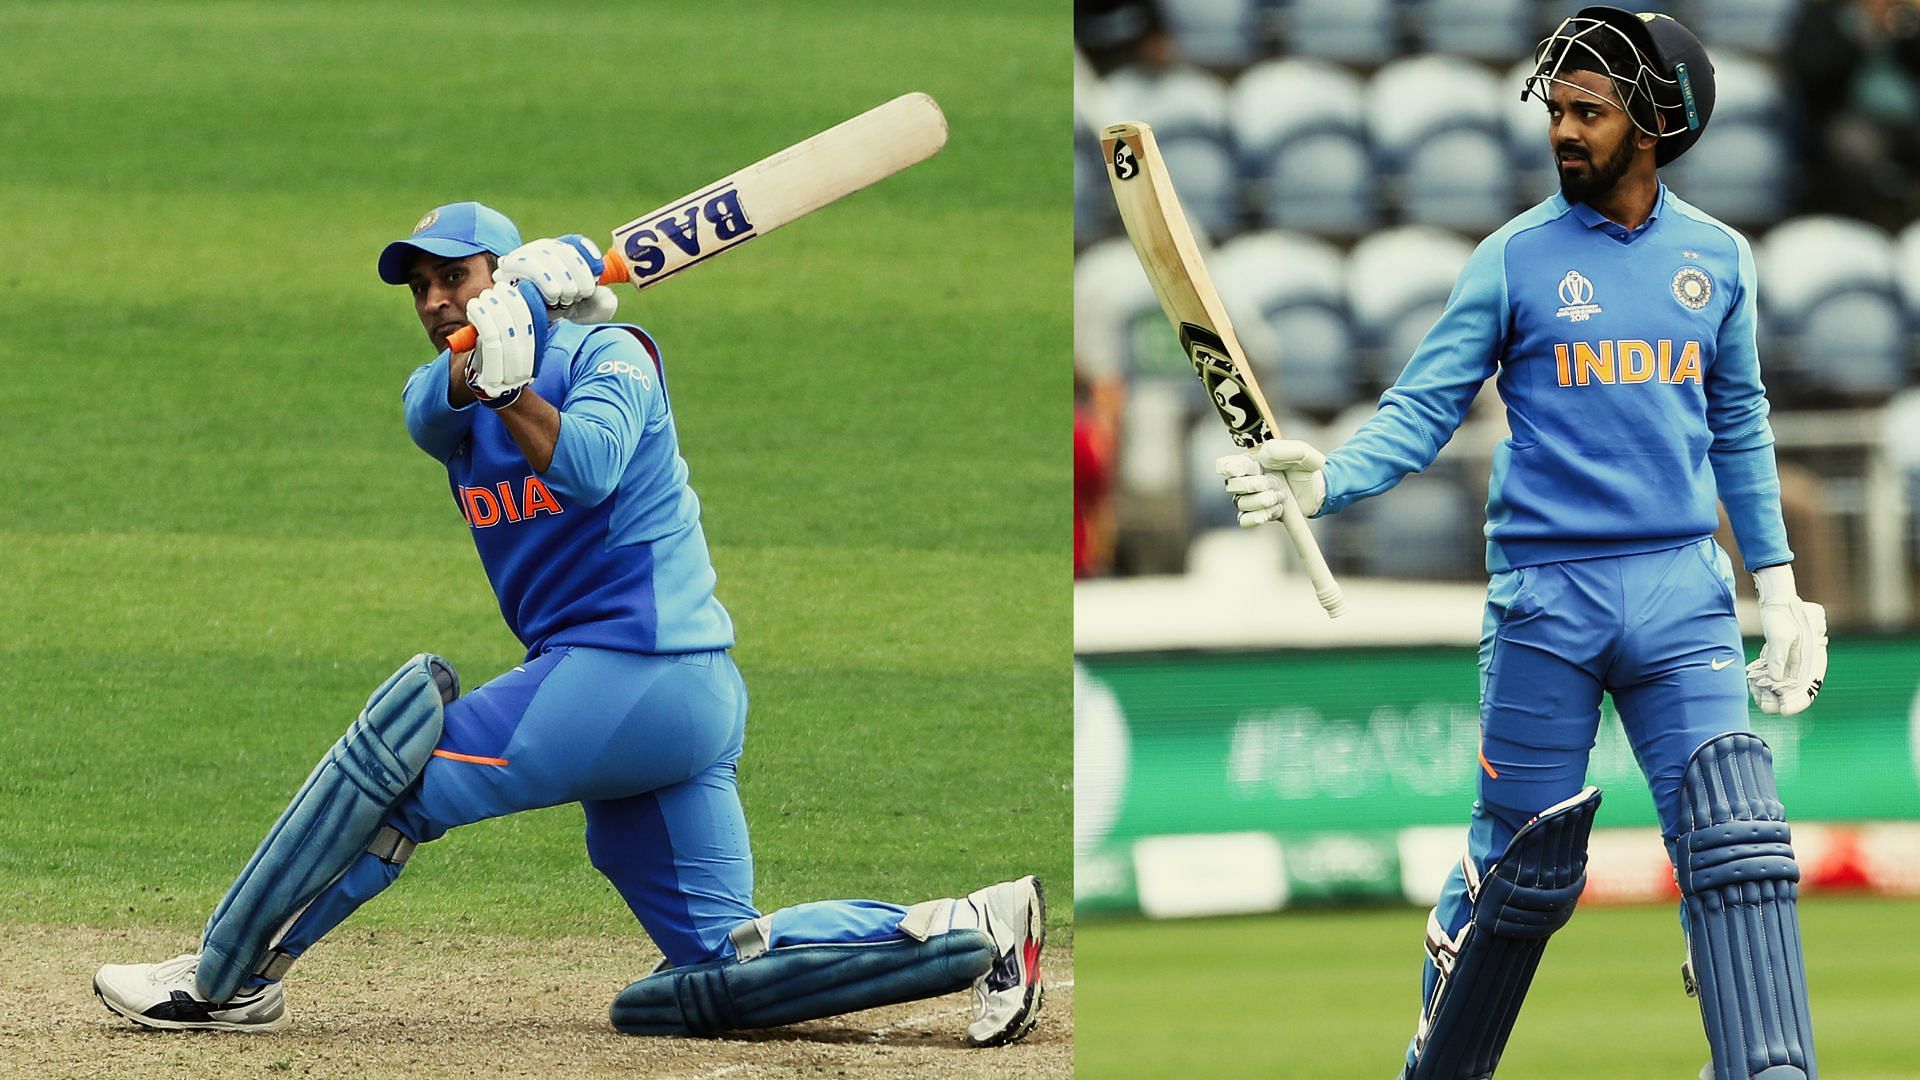 Riding on Dhoni’s and Rahul’s century, India posted a mammoth total of 359-7 at the end of their 50 overs.